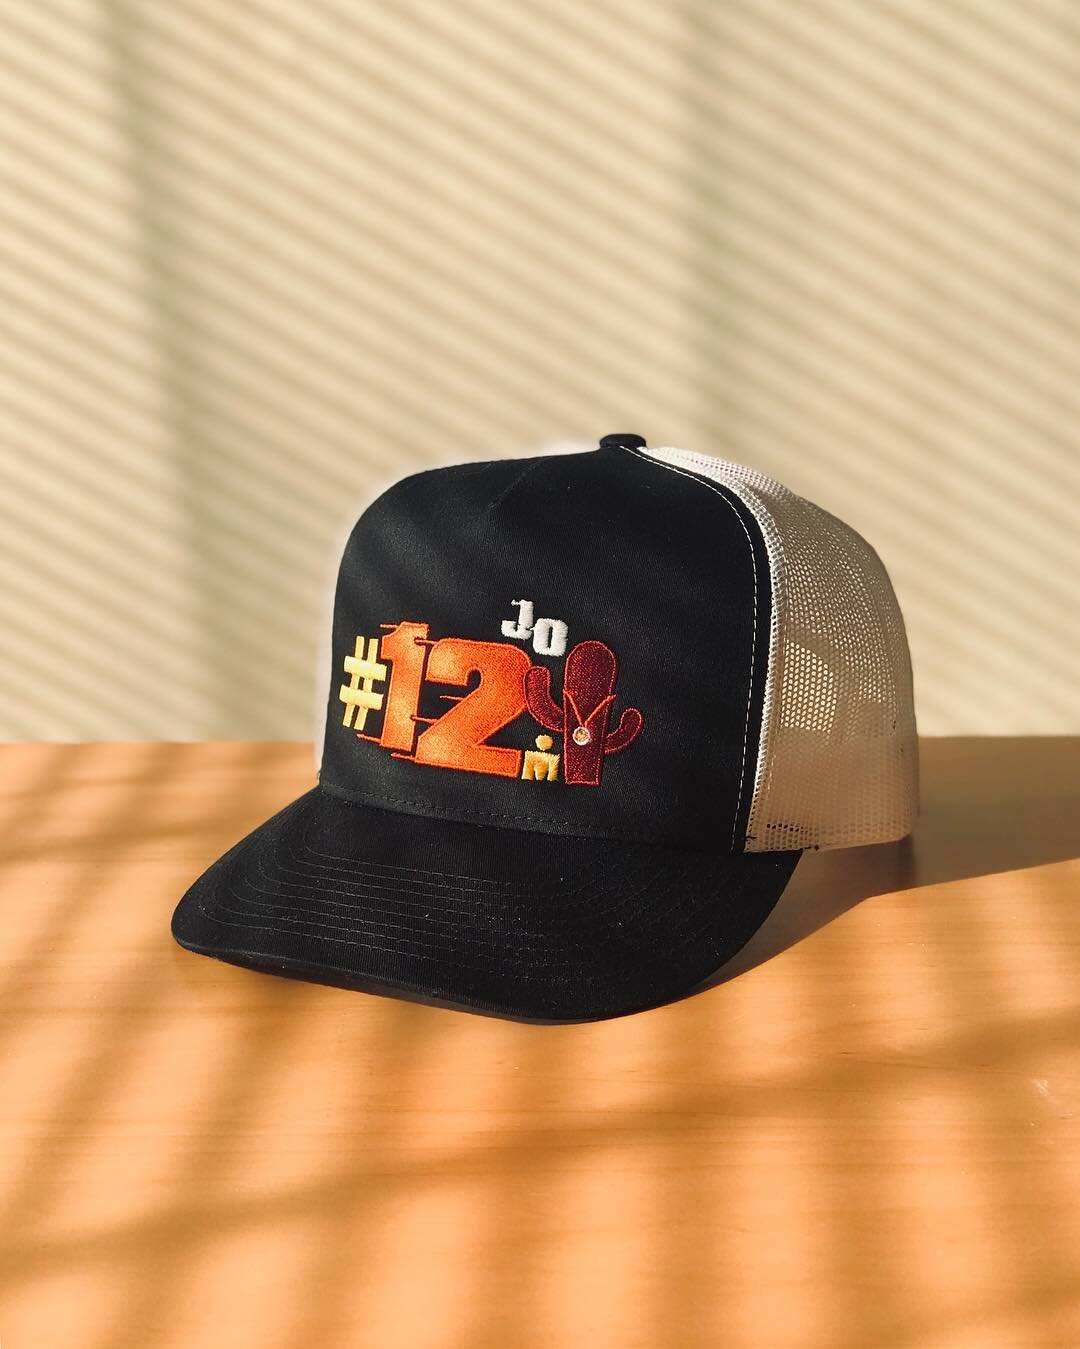 Created this hat design for my dad&rsquo;s 12th @ironmantri this weekend in Phoenix, AZ. After his 12th is completed, he qualifies for racing in Kona, Hawaii! He&rsquo;s pushed himself and has come a long way to get where he is today. Proud of ya @rz